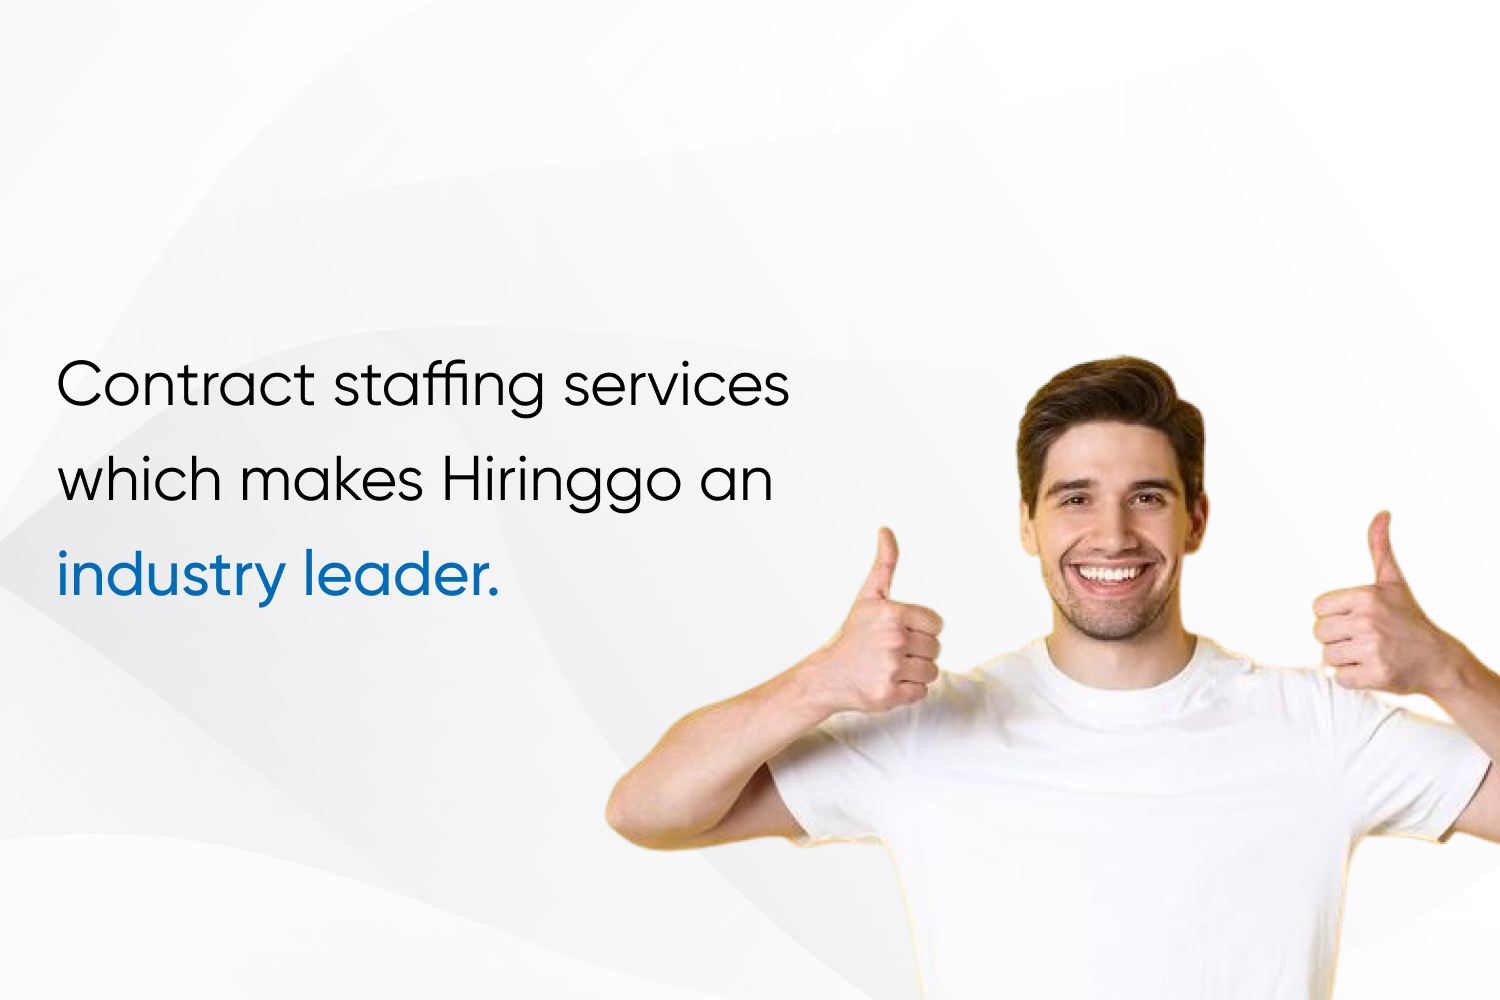 Contract staffing services which makes Hiringgo an industry leader